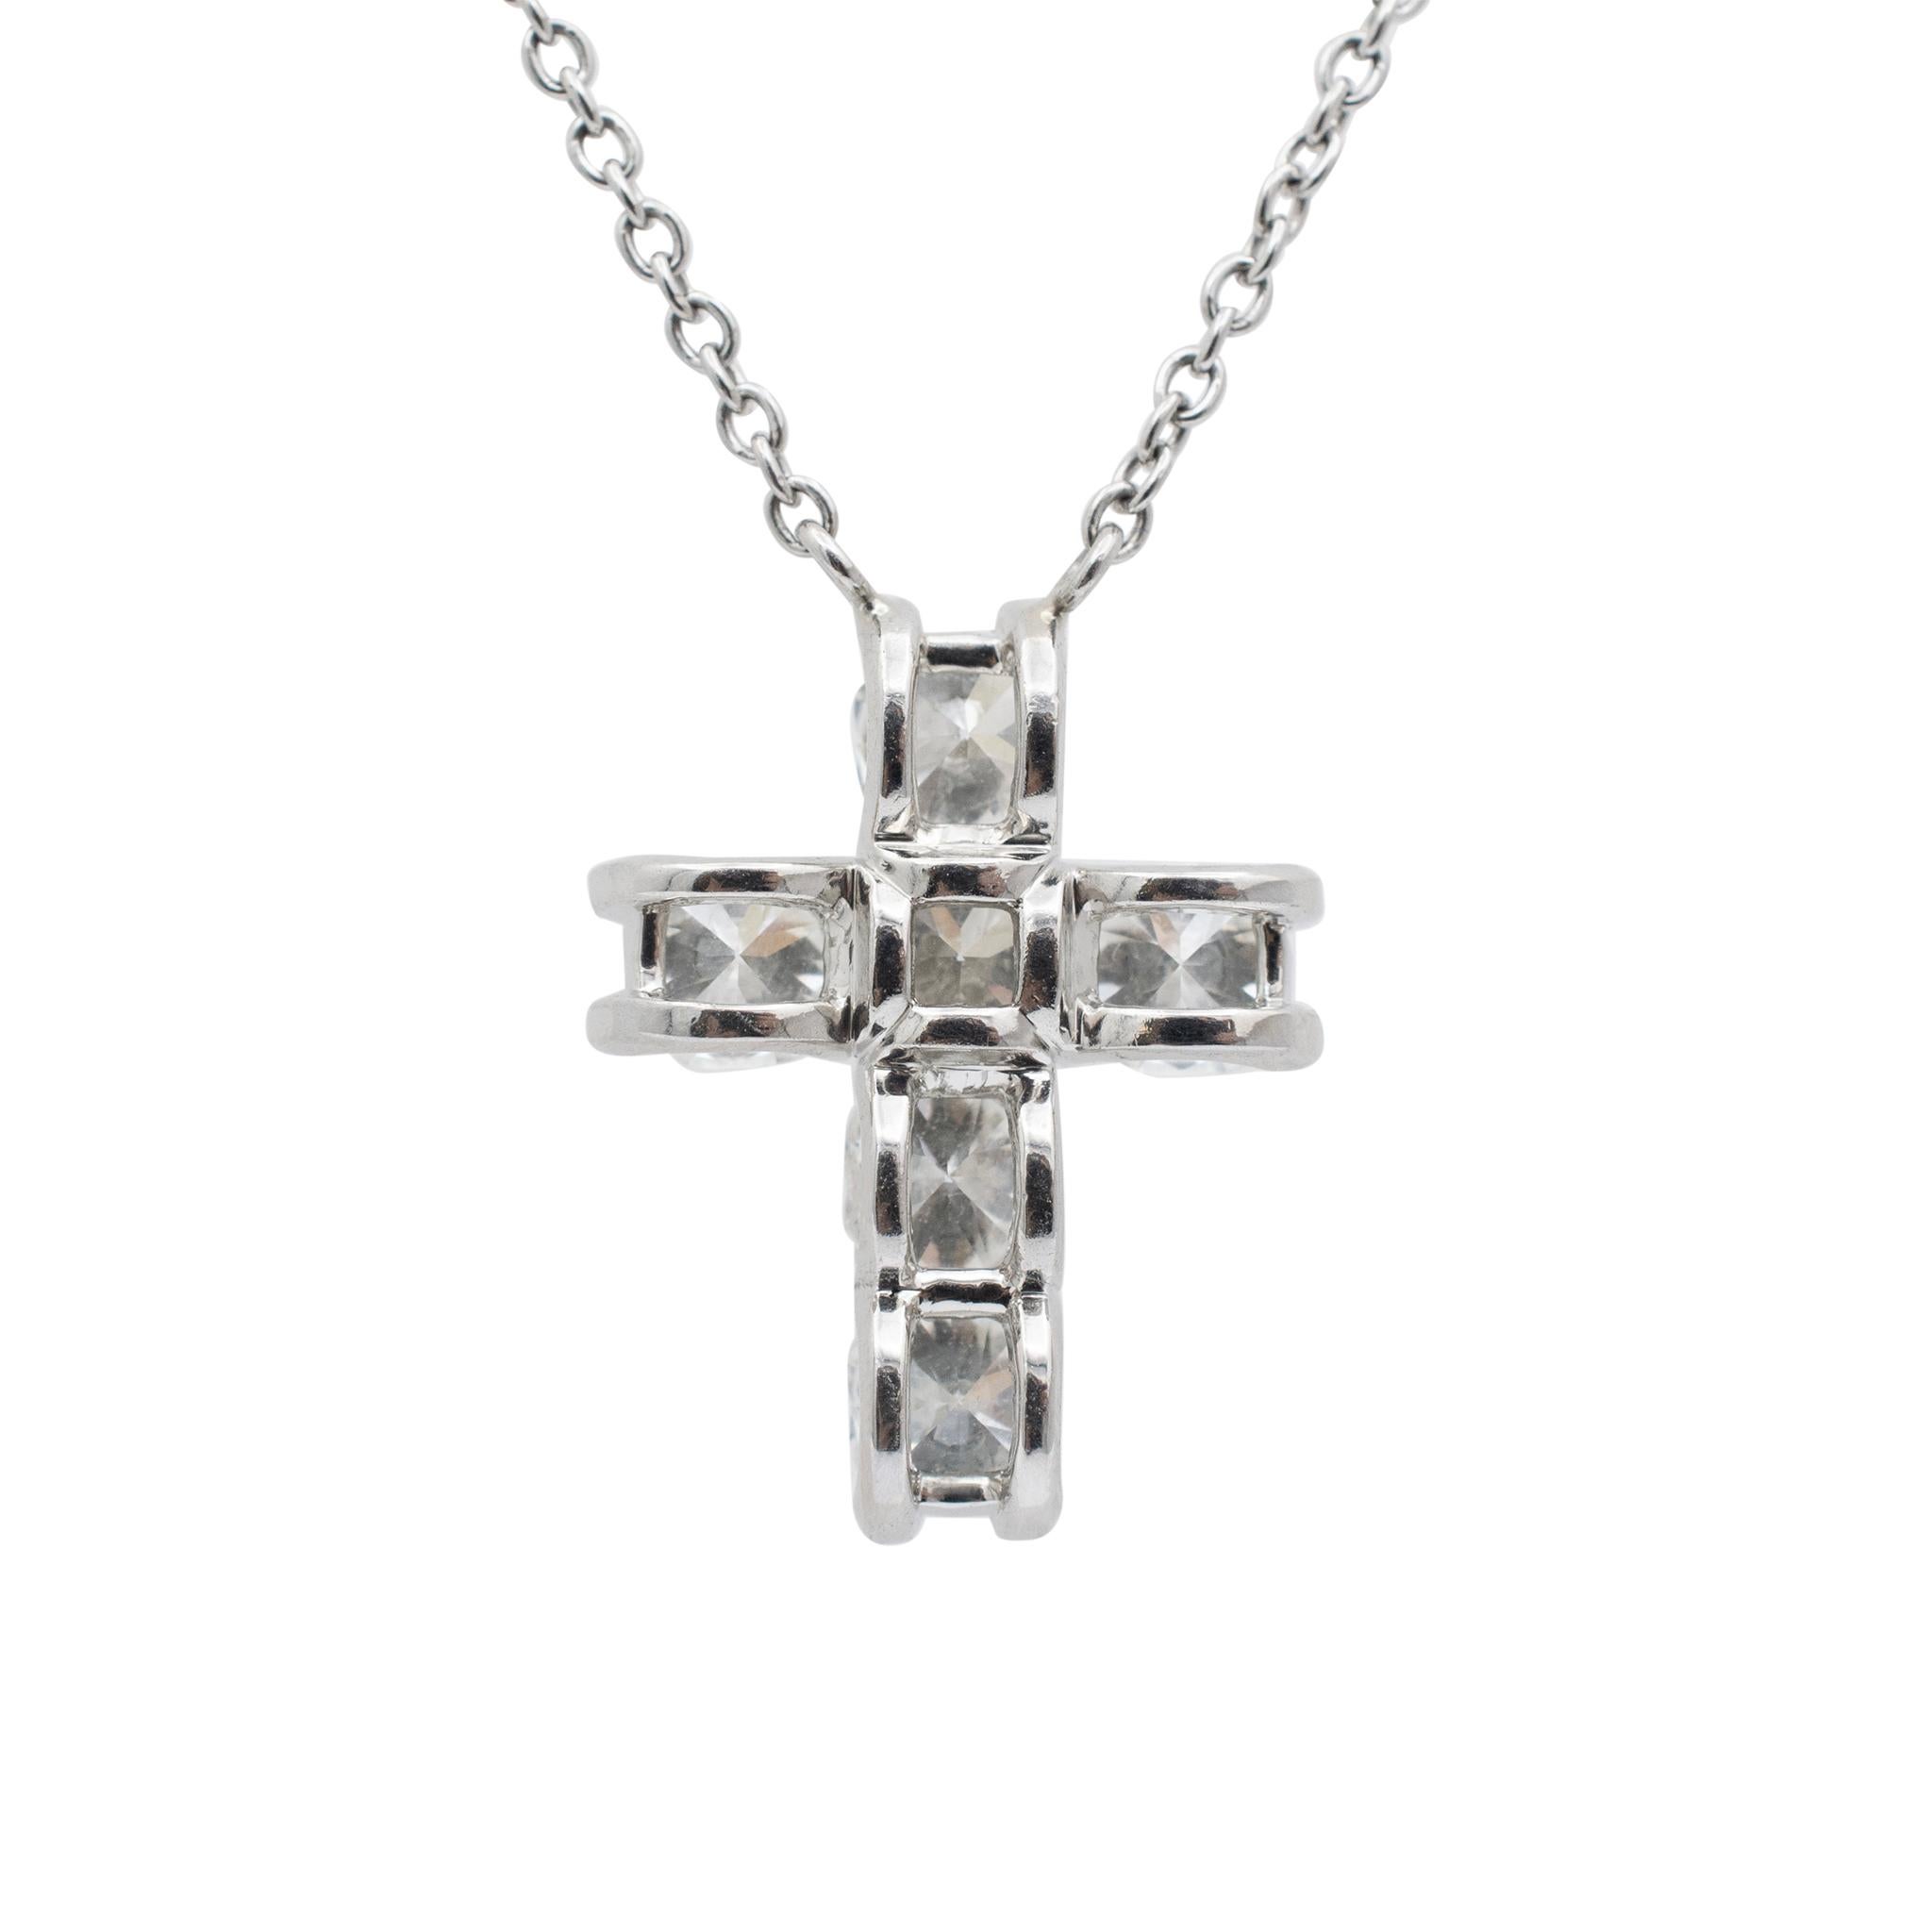 Gender: Ladies

Metal Type: 950 platinum

Length: 16.00 inches

Cross pendant measurements: 18.15mm x 14.15mm

Weight: 6.22 grams

Lady's custom made polished 950 platinum, diamond necklace. Engraved with 